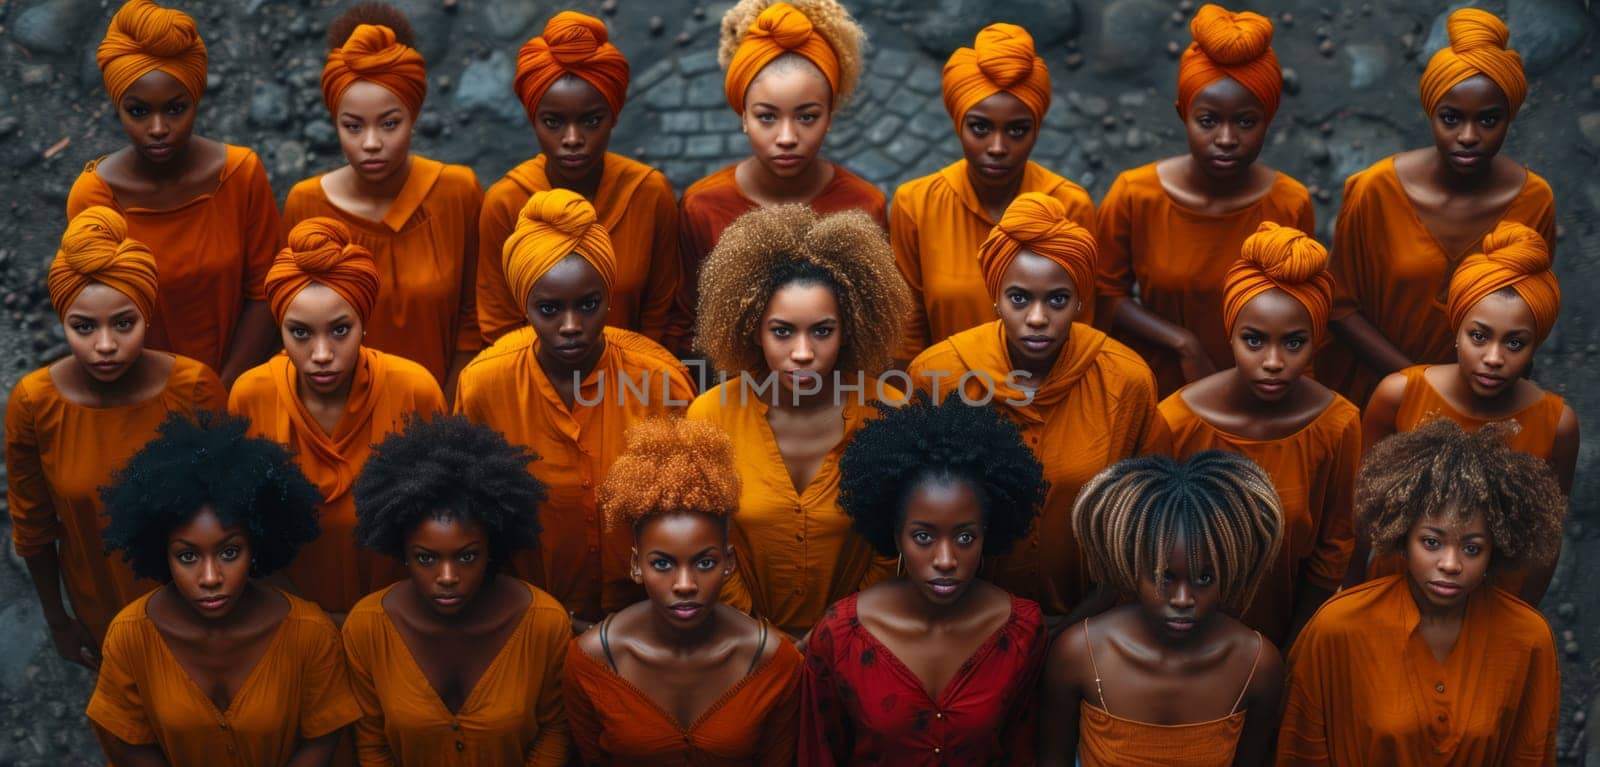 A team of women in orange turbans stand together at a cultural event by richwolf